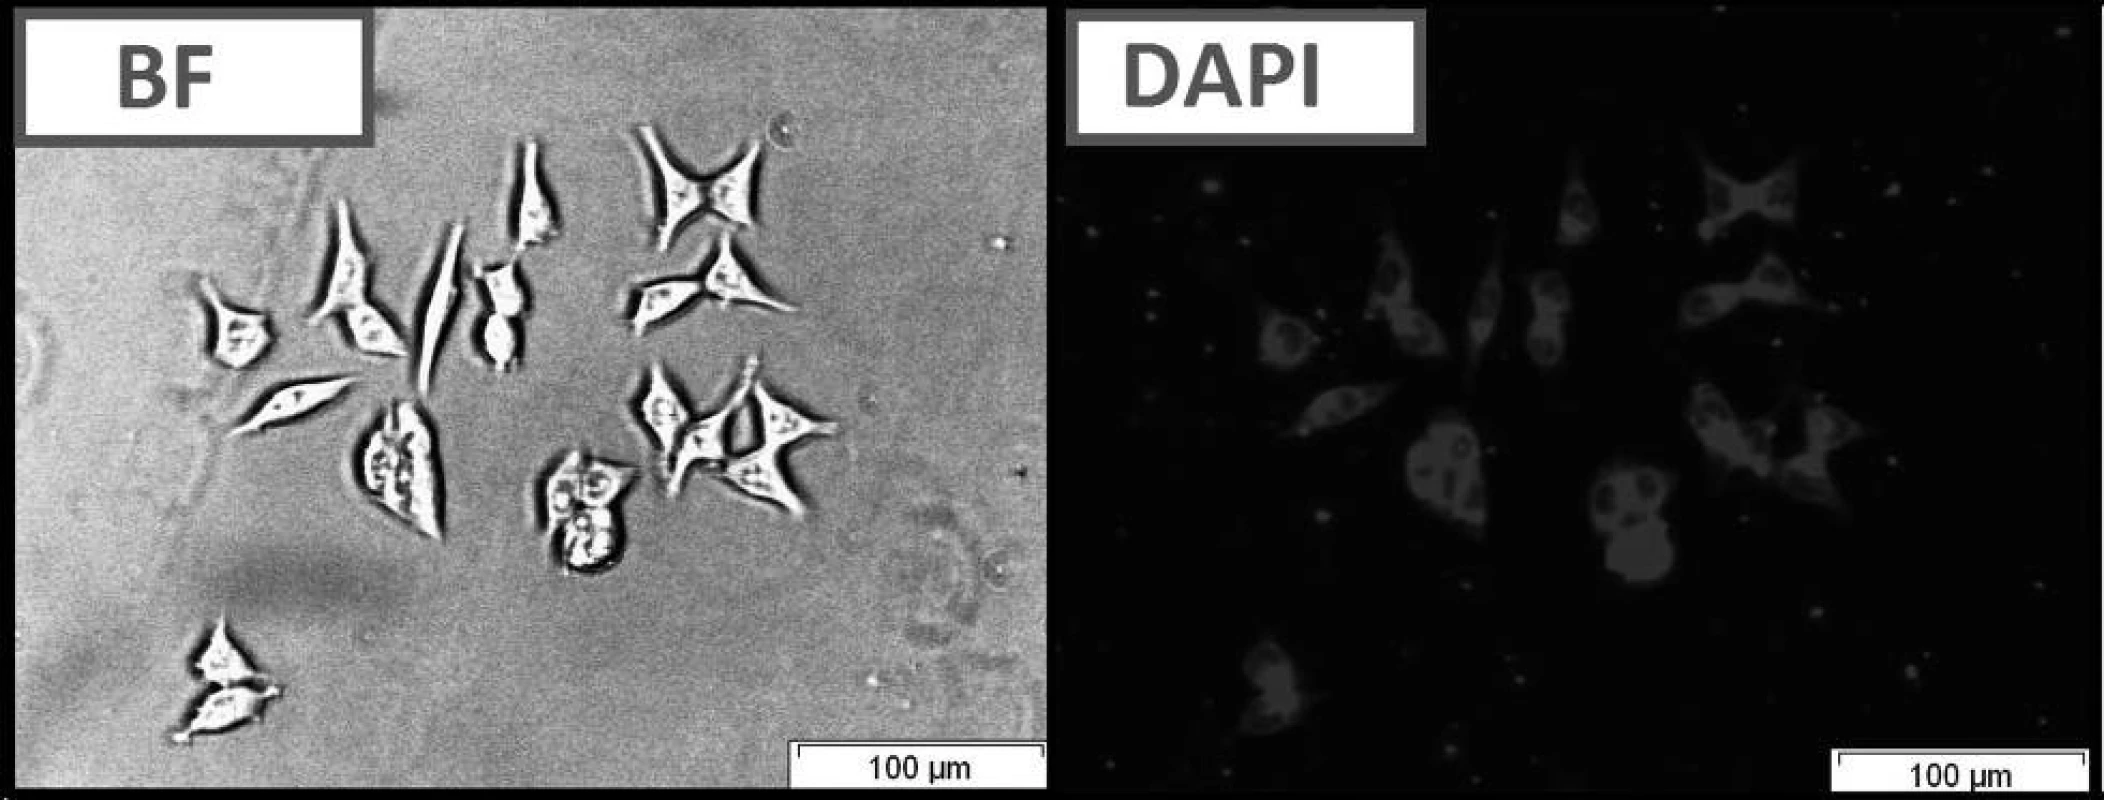 Live cell imaging of HCT116 cells following treatment with compound C using bright field optical microscopy (BF) and fluorescence microscopy (DAPI filter).